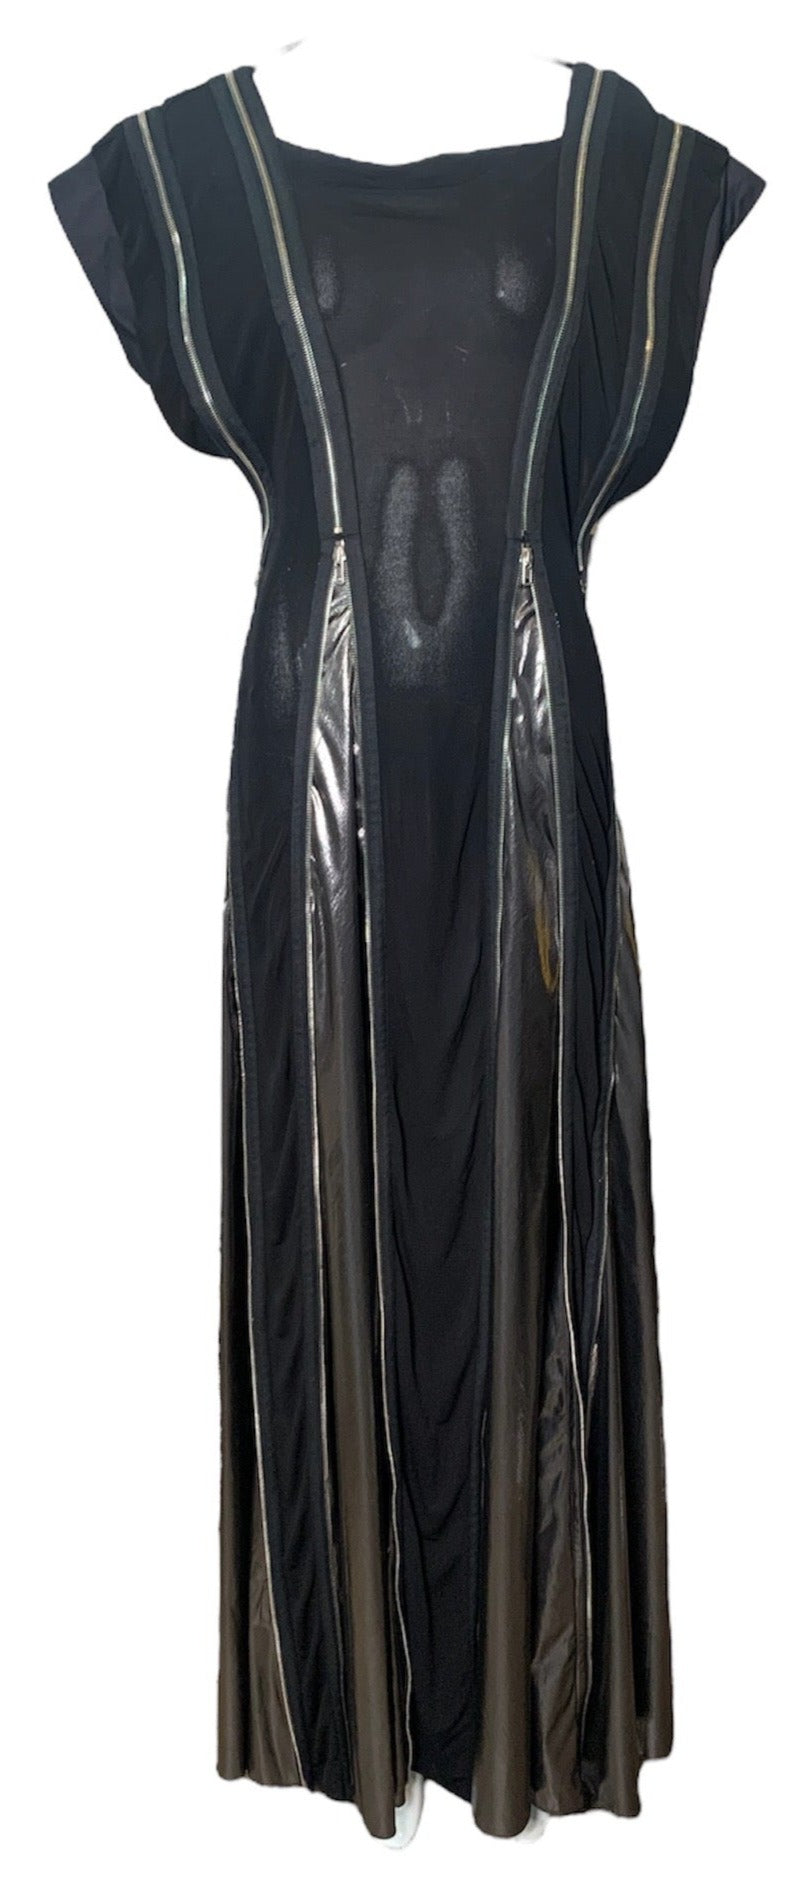  Jean Paul Gaultier  2000s Black and Silver Zipper Jersey Gown FRONT 1 of 9